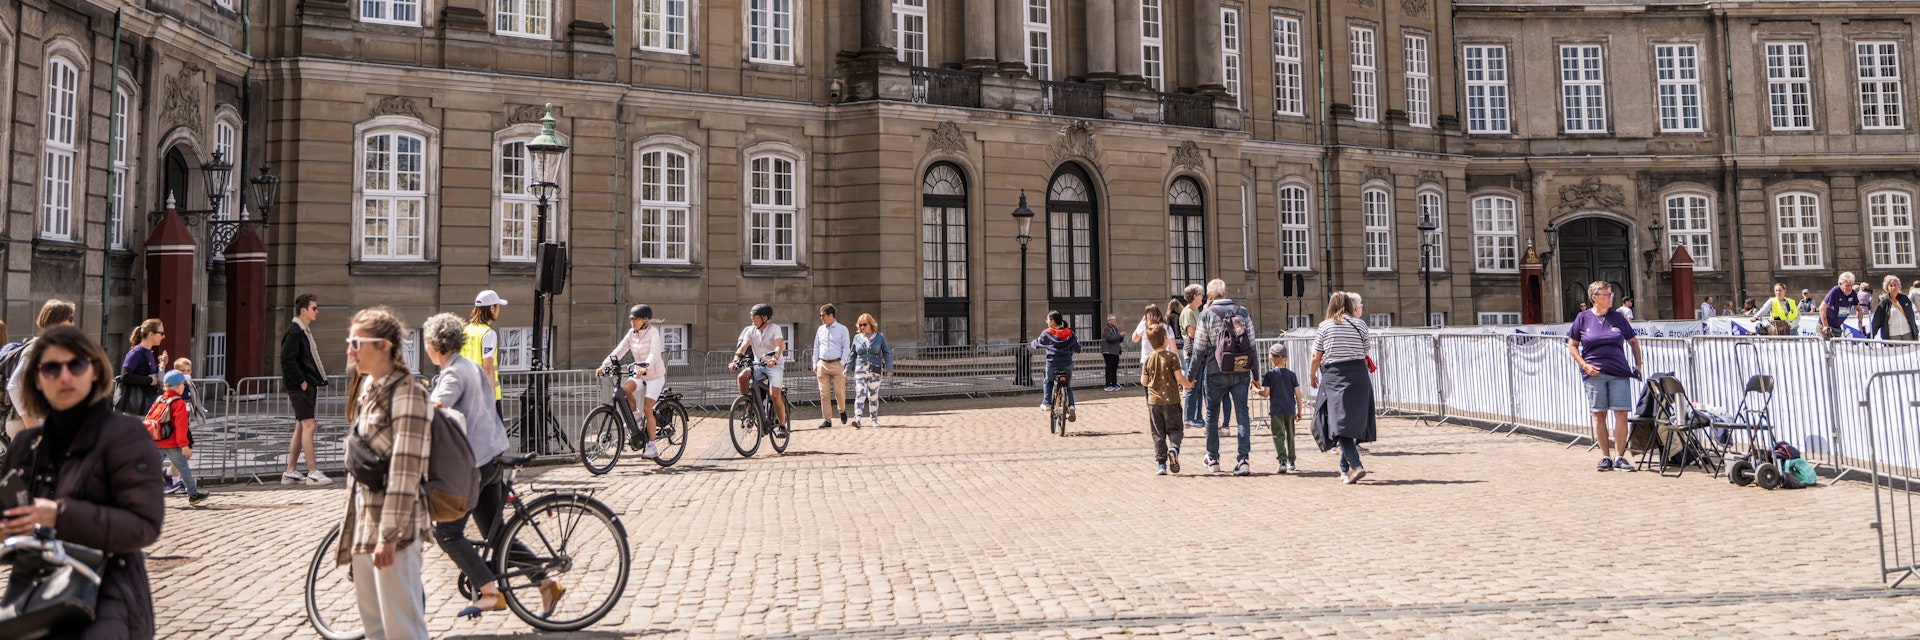 Amalienborg Palace in central Copenhagen consists of four mansions, two of which are home to the queen and the crown prince.